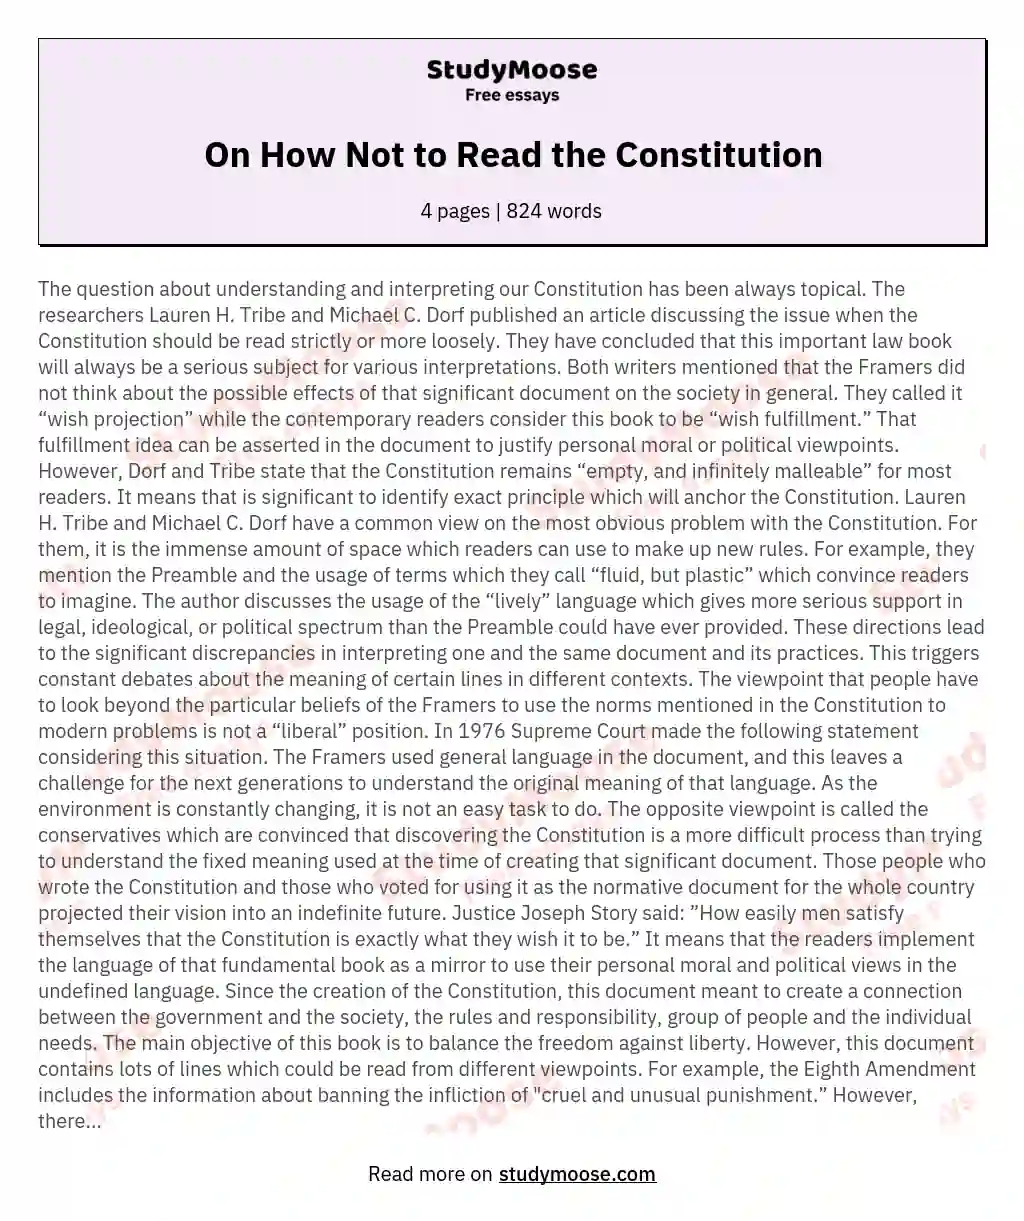 On How Not to Read the Constitution essay